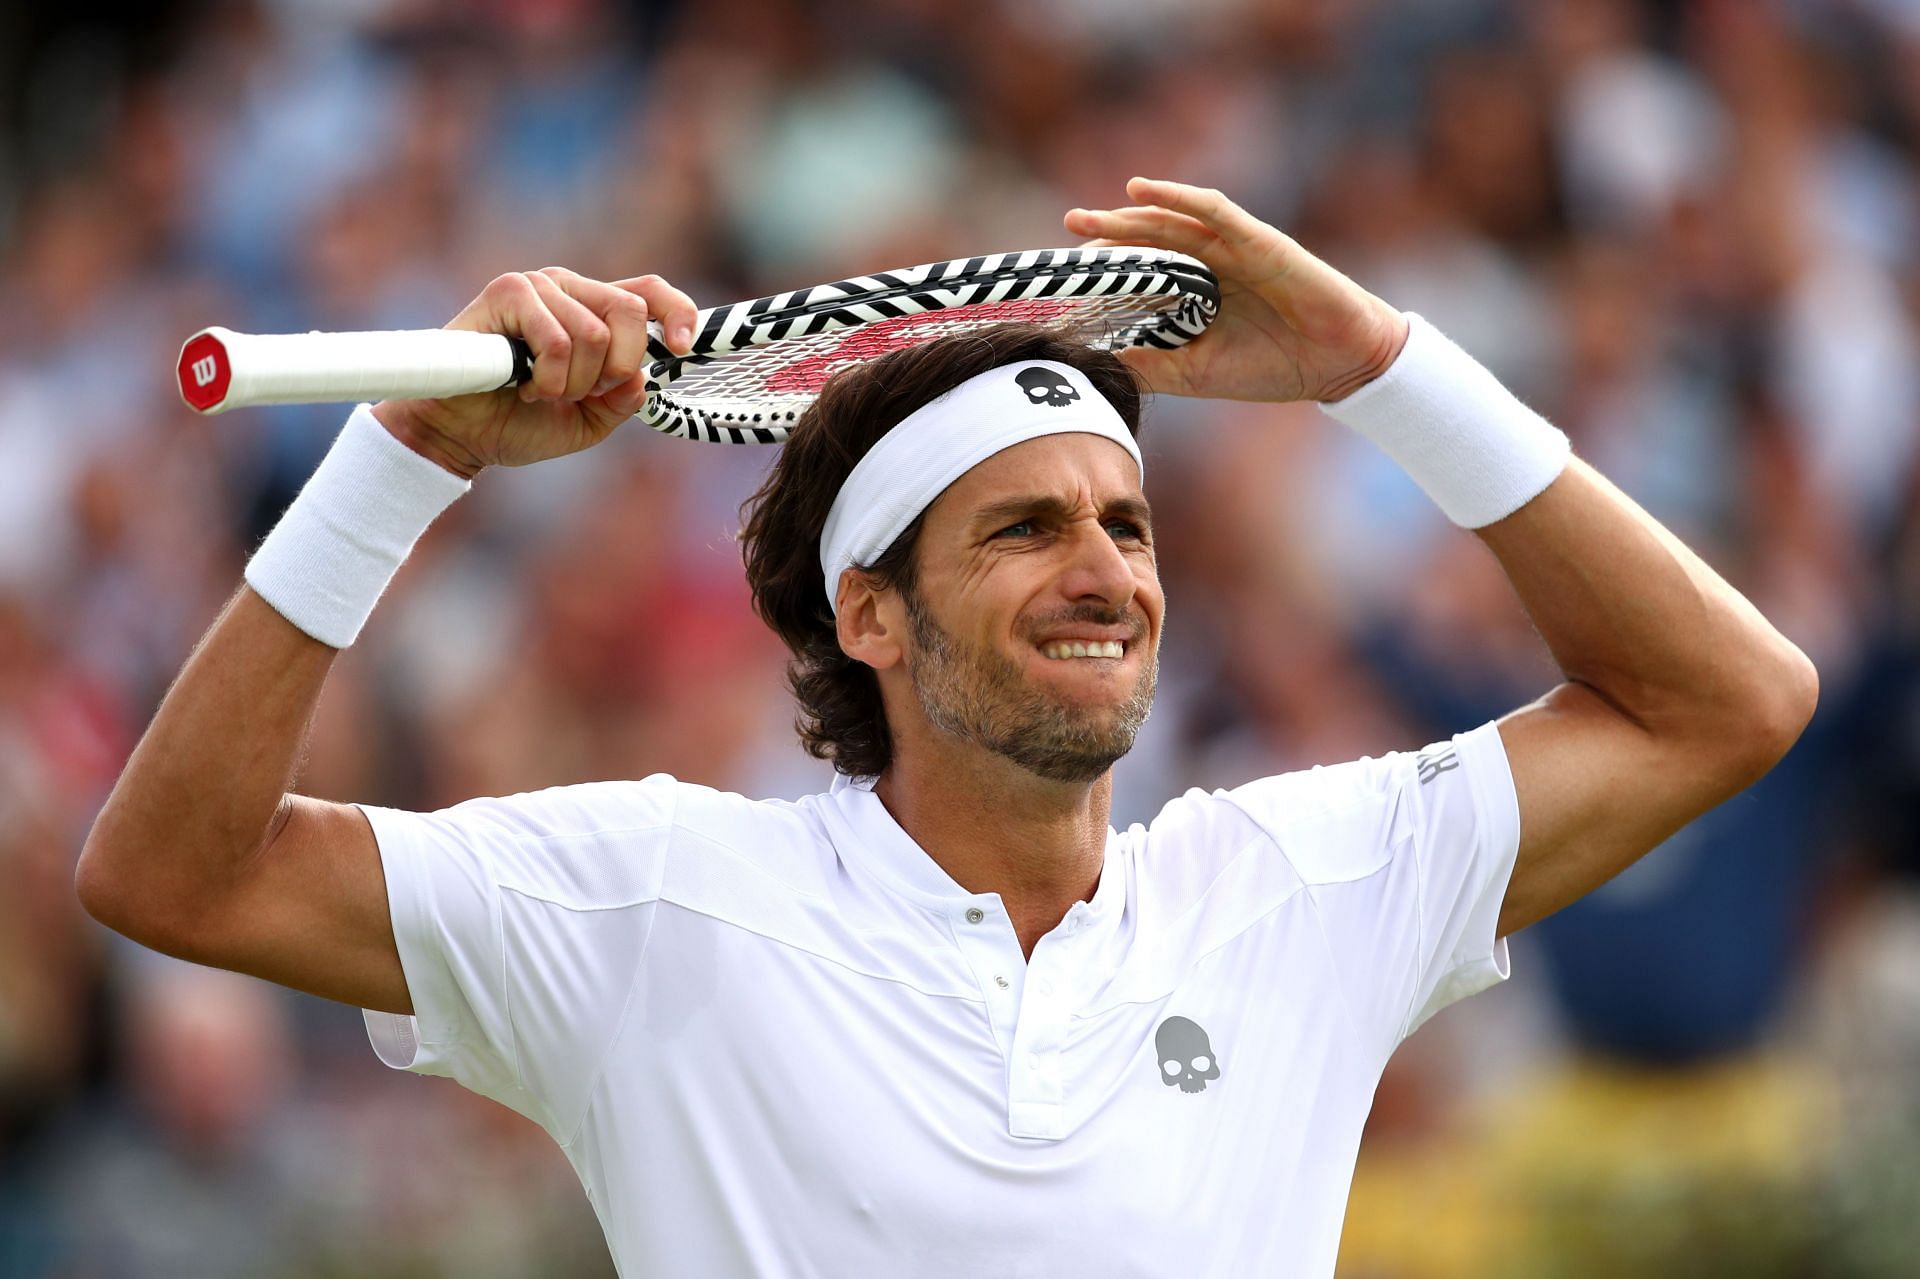 Feliciano Lopez is set to play the 2022 Wimbledon.